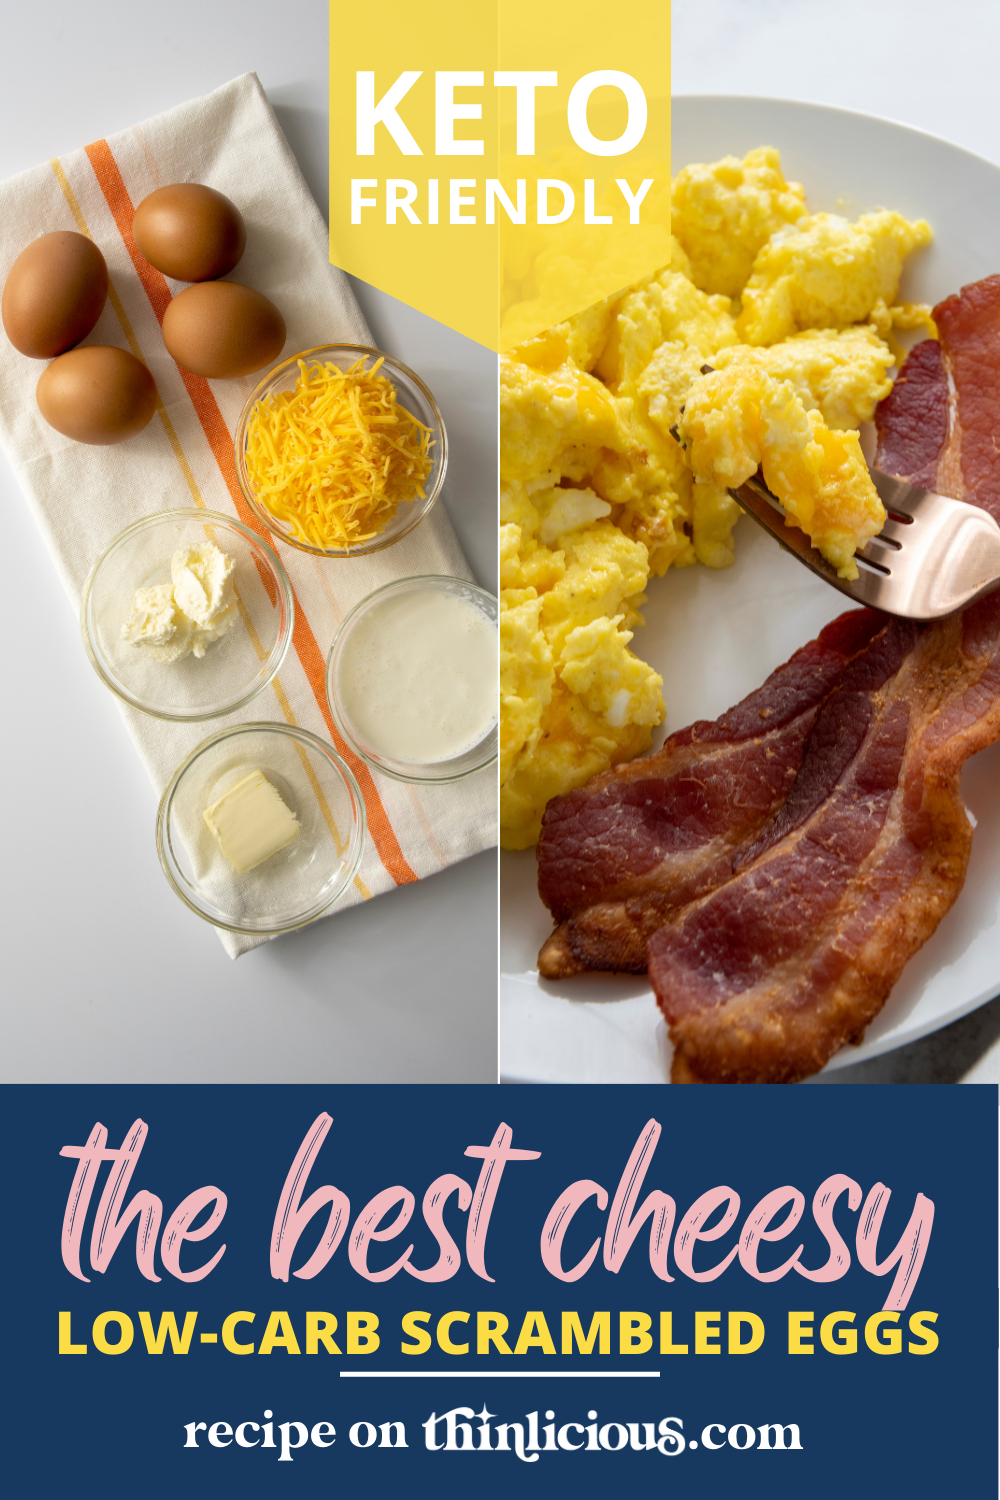 The BEST Cheesy Low-Carb Scrambled Eggs - Thinlicious